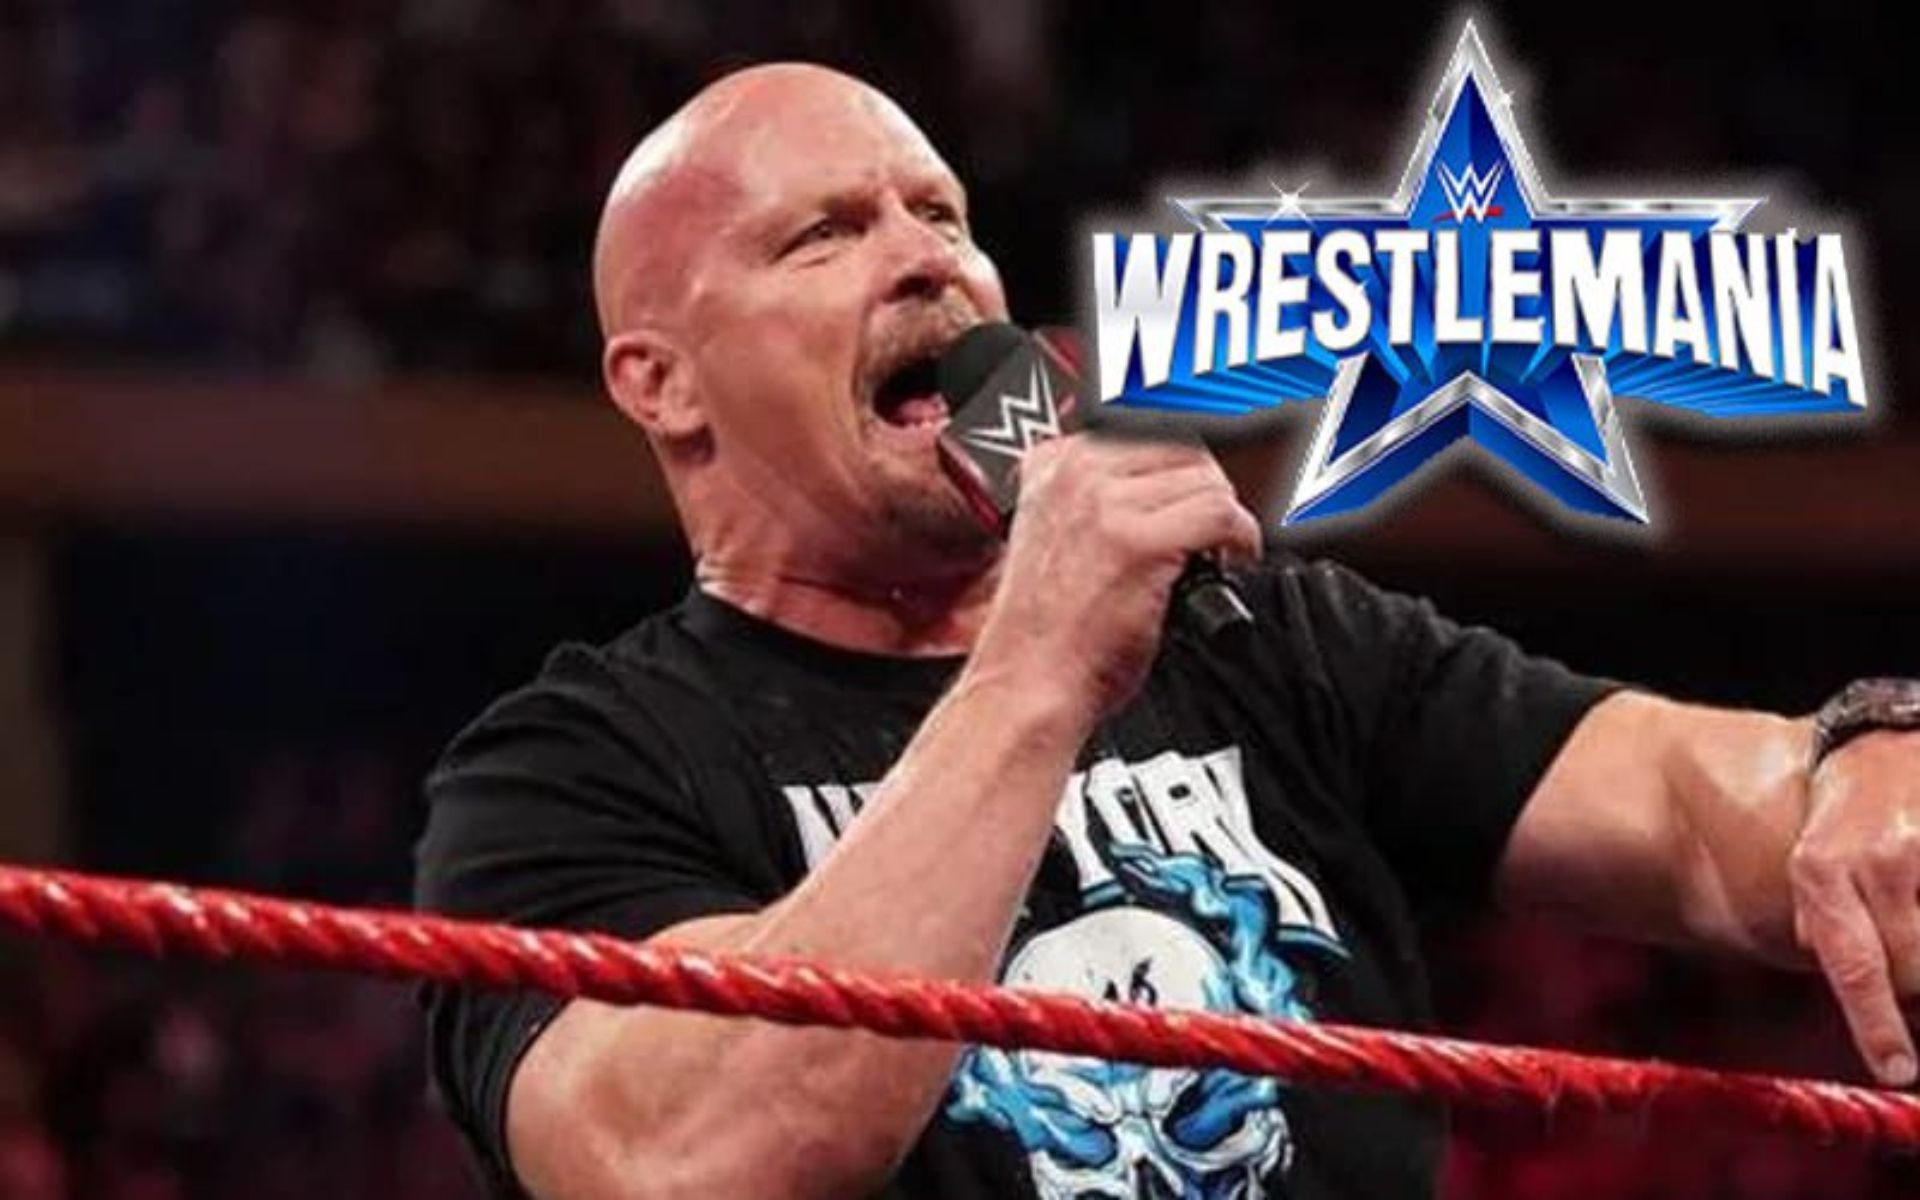 Vince Russo does not like the idea of Steve Austin coming out of retirement.